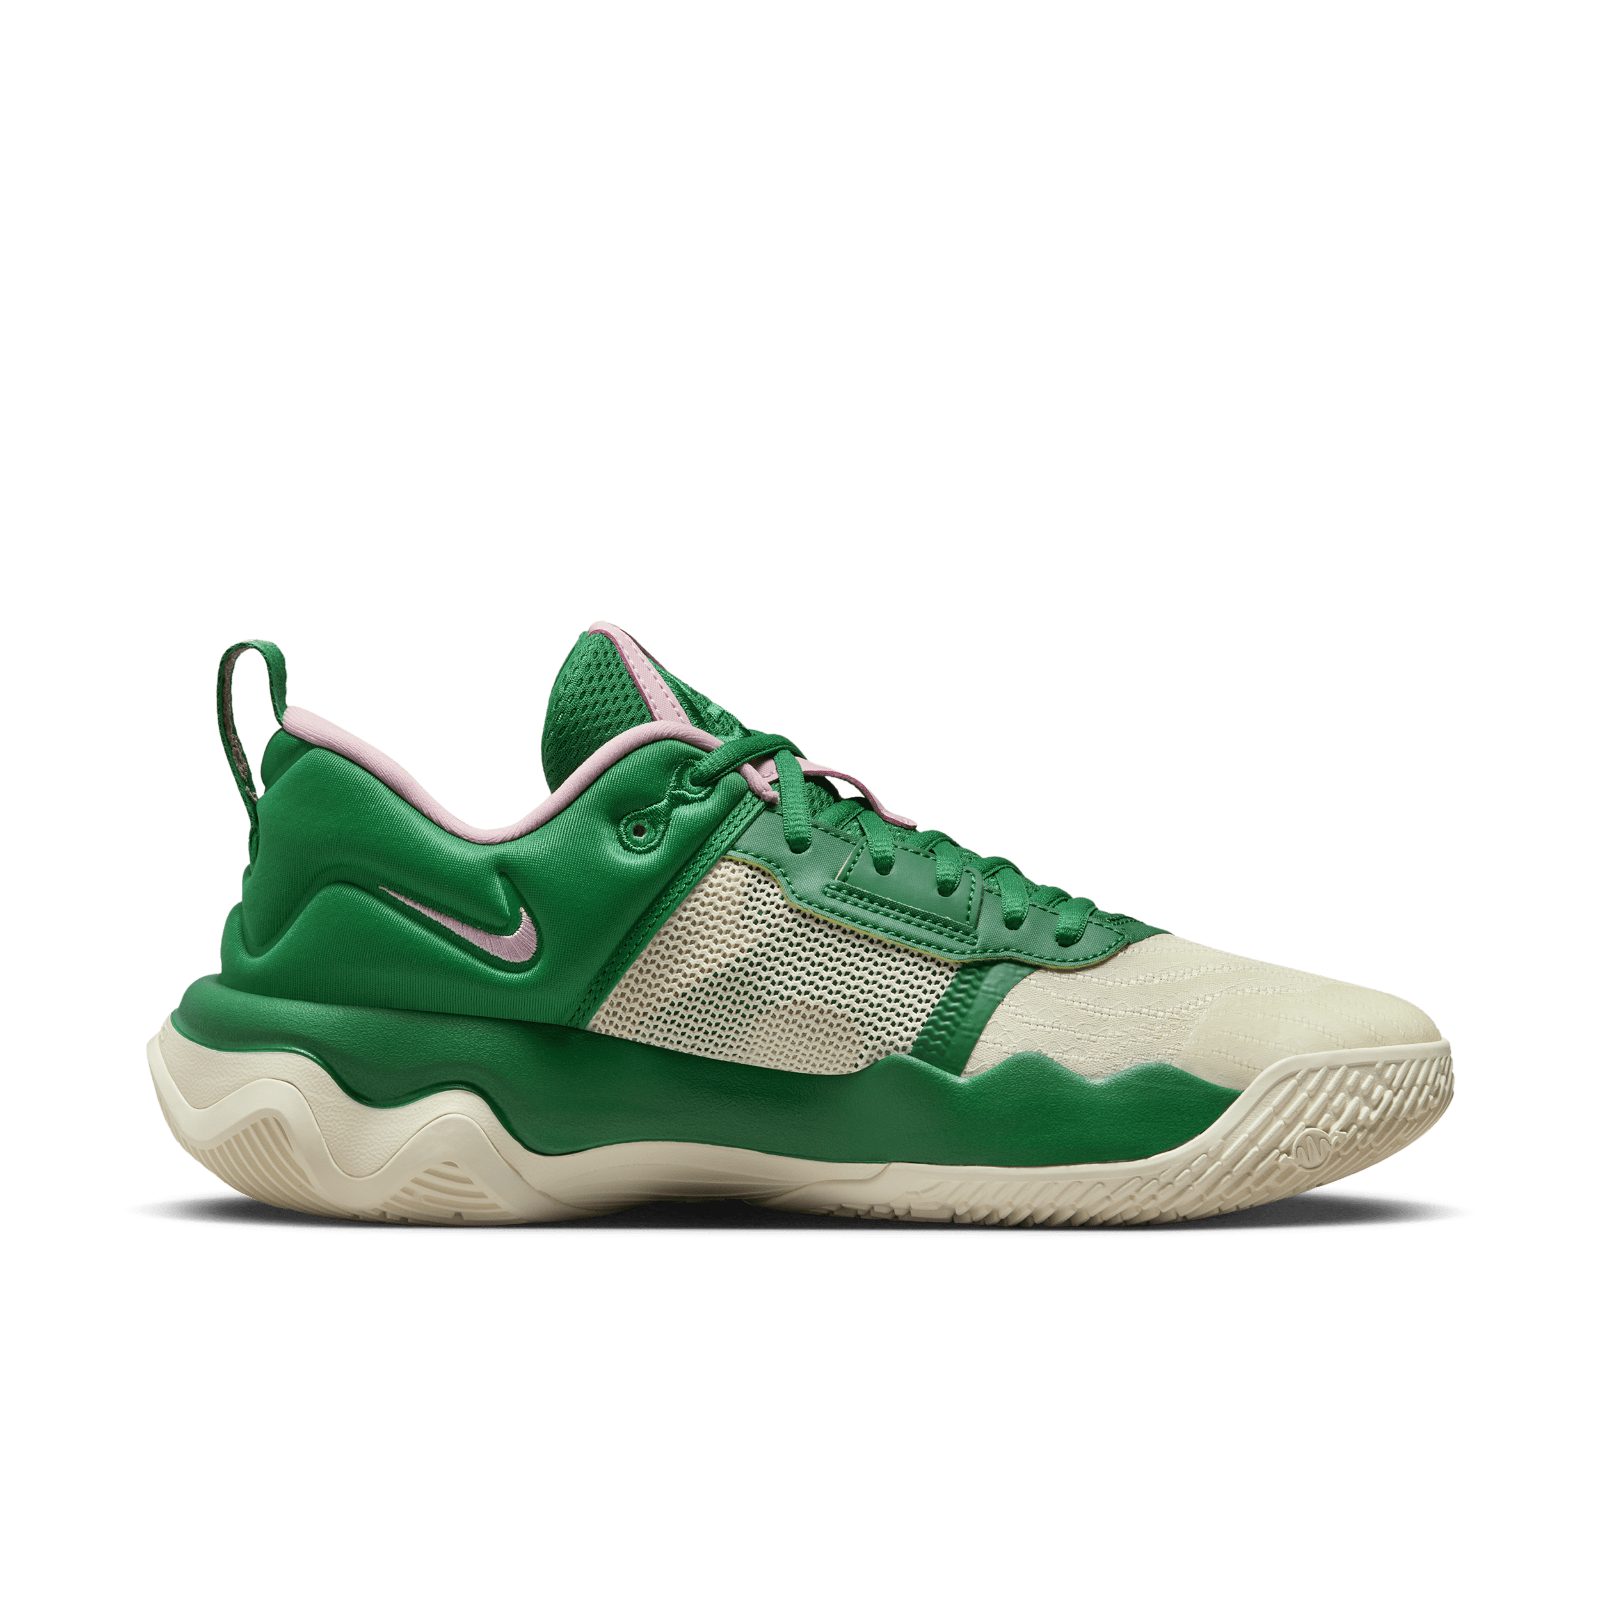 Giannis Immortality 3 "Green/Pink"